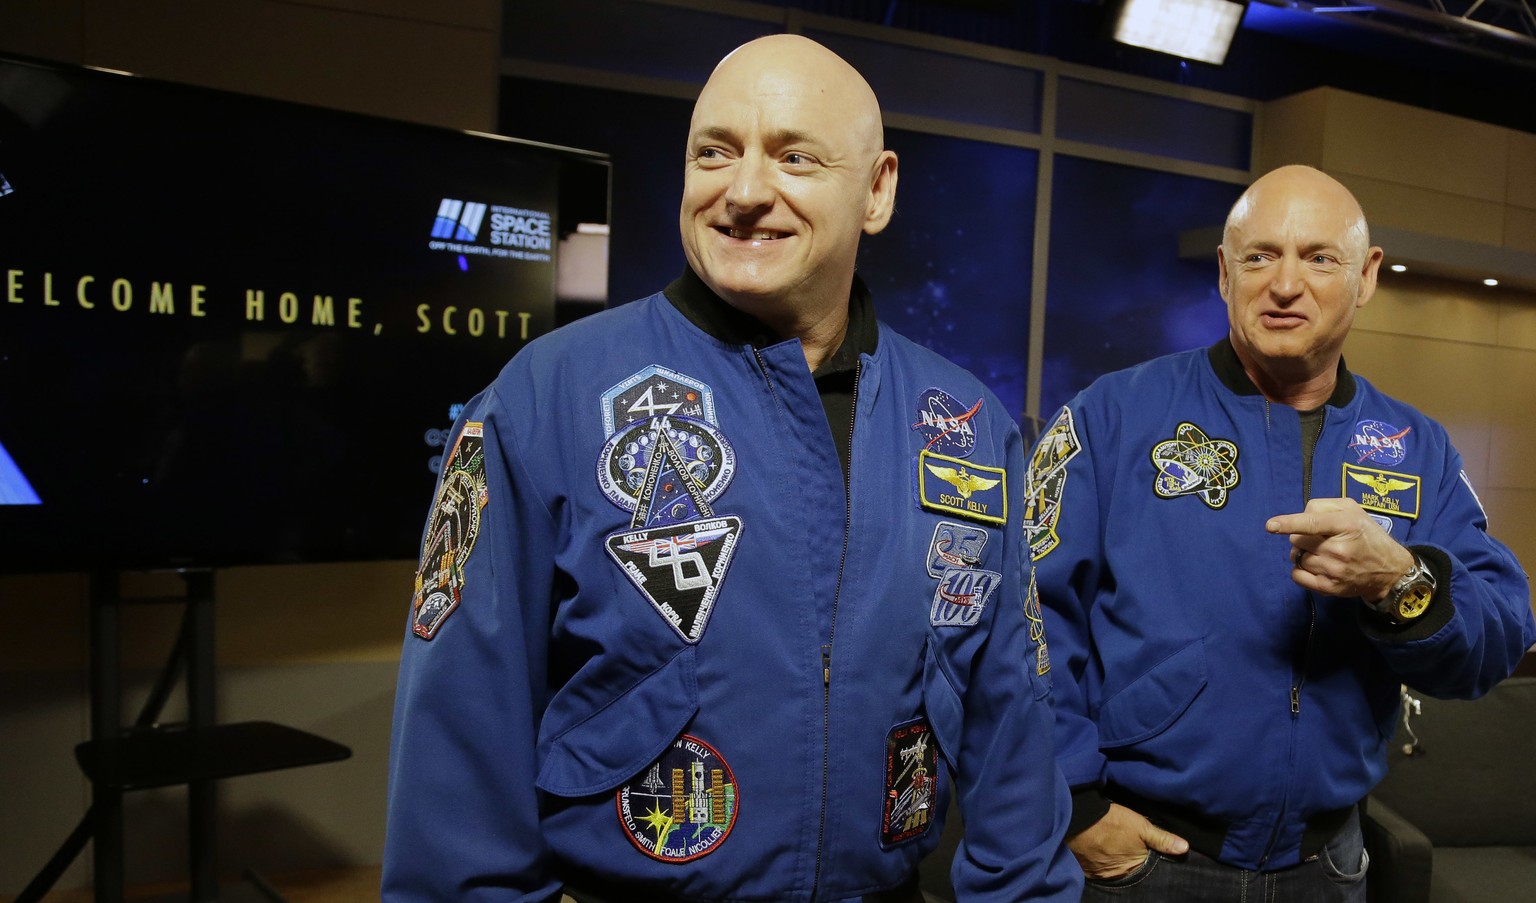 FILE - In this March 4, 2016, file photo, NASA astronaut Scott Kelly, left, and his twin Mark get together before a press conference in Houston. Scott Kelly set a U.S. record with his a 340-day missio ...